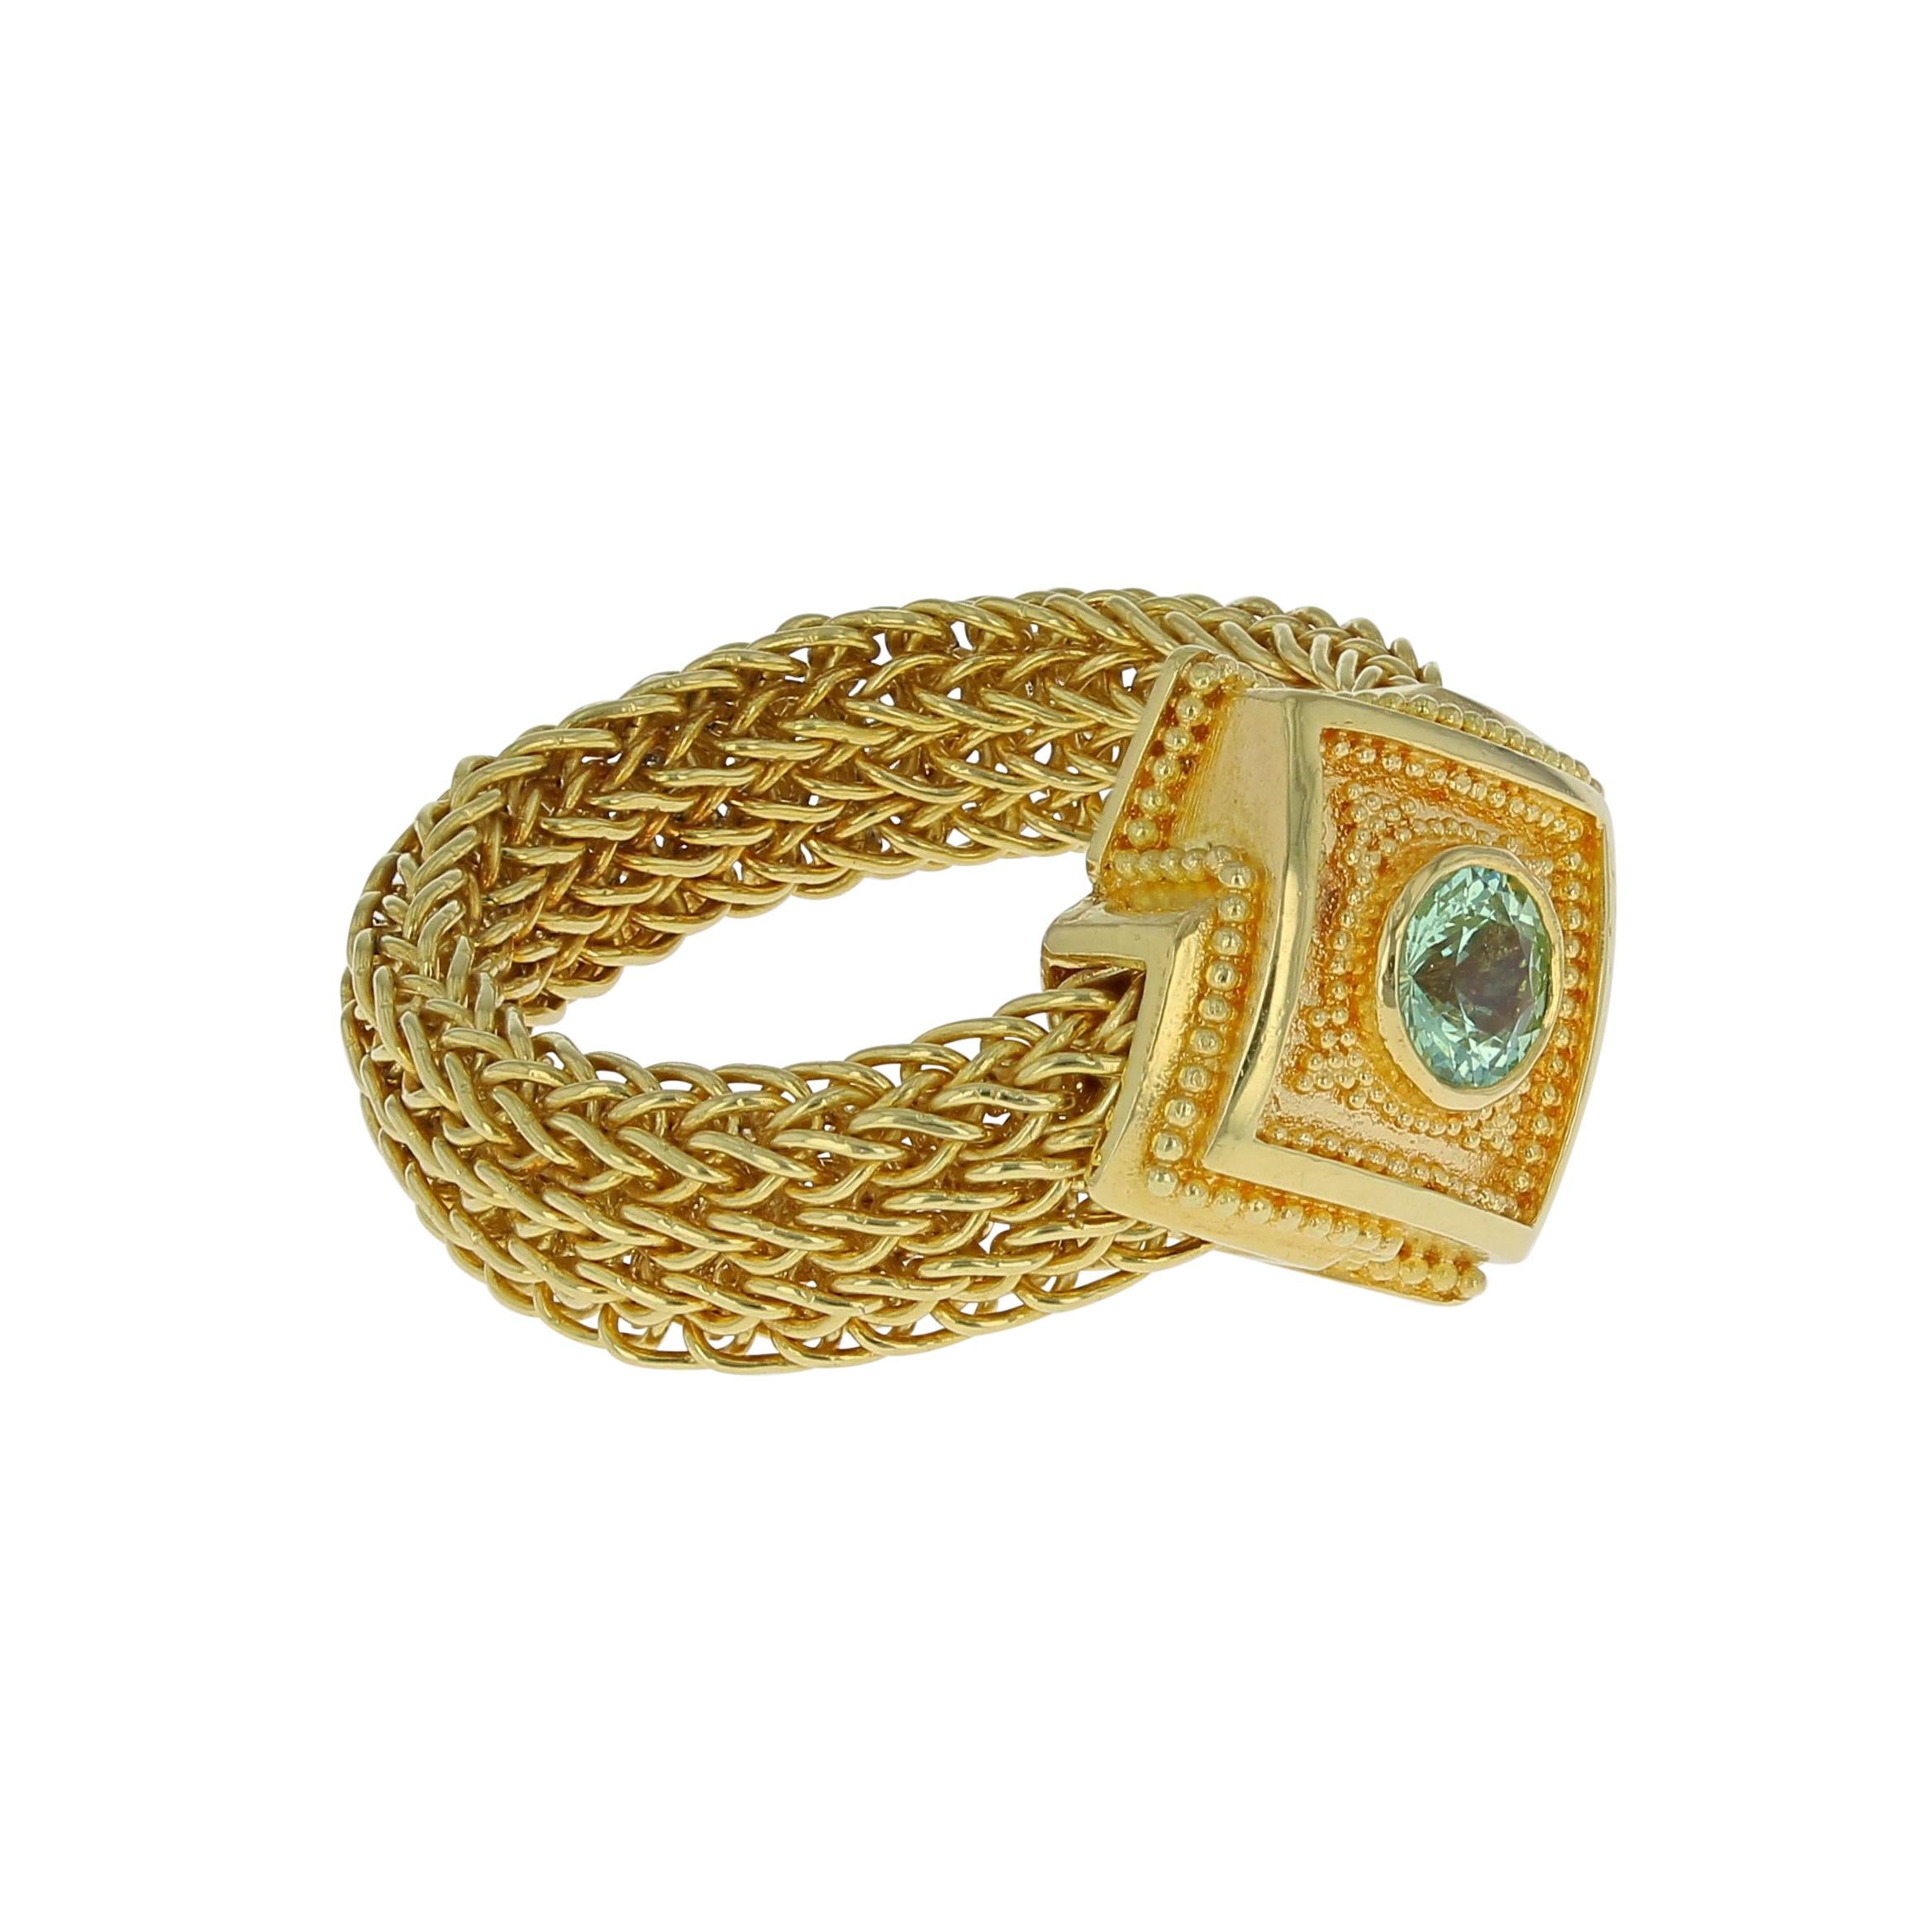 Kent Raible 18 Karat Gold Green Garnet Fashion Ring with Woven Chain In New Condition For Sale In Mossrock, WA